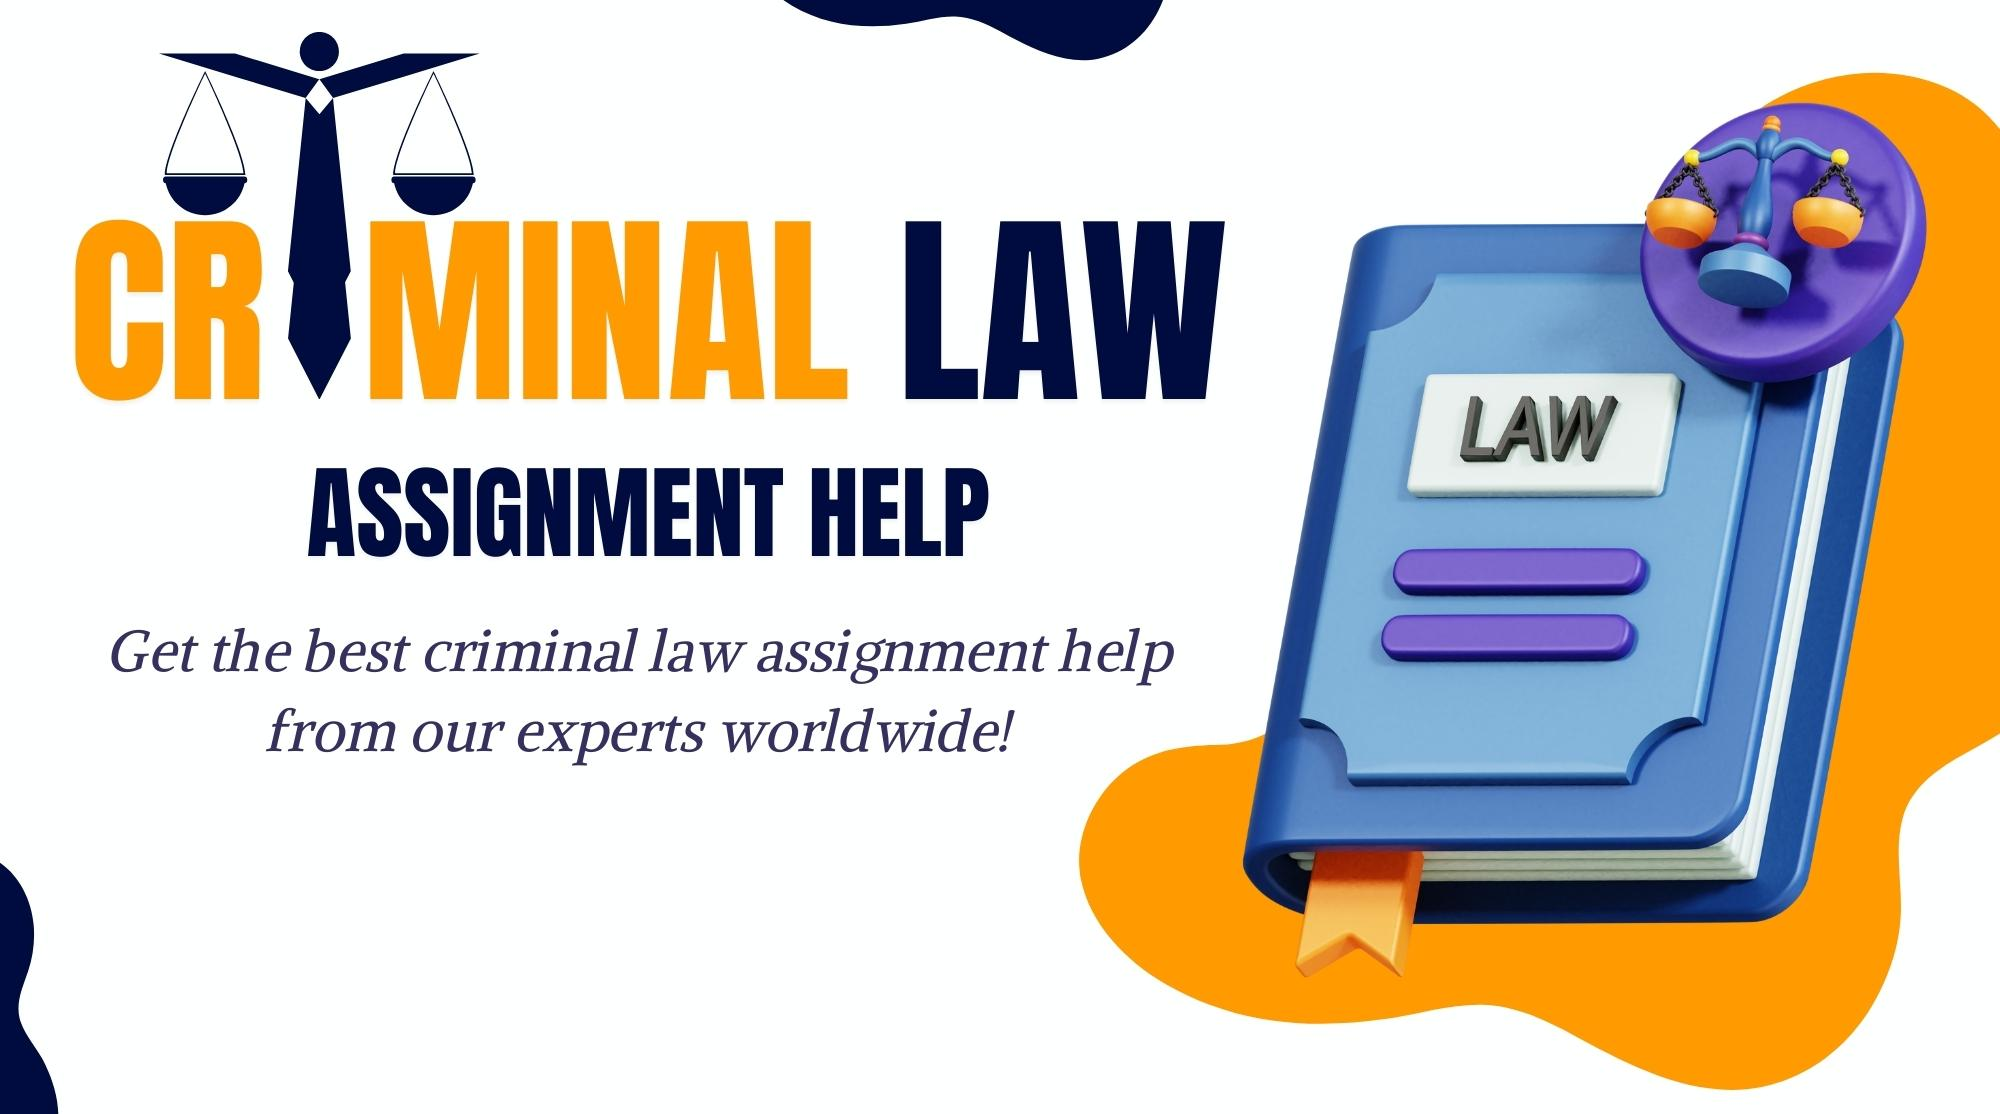 Criminal Law Assignment Help